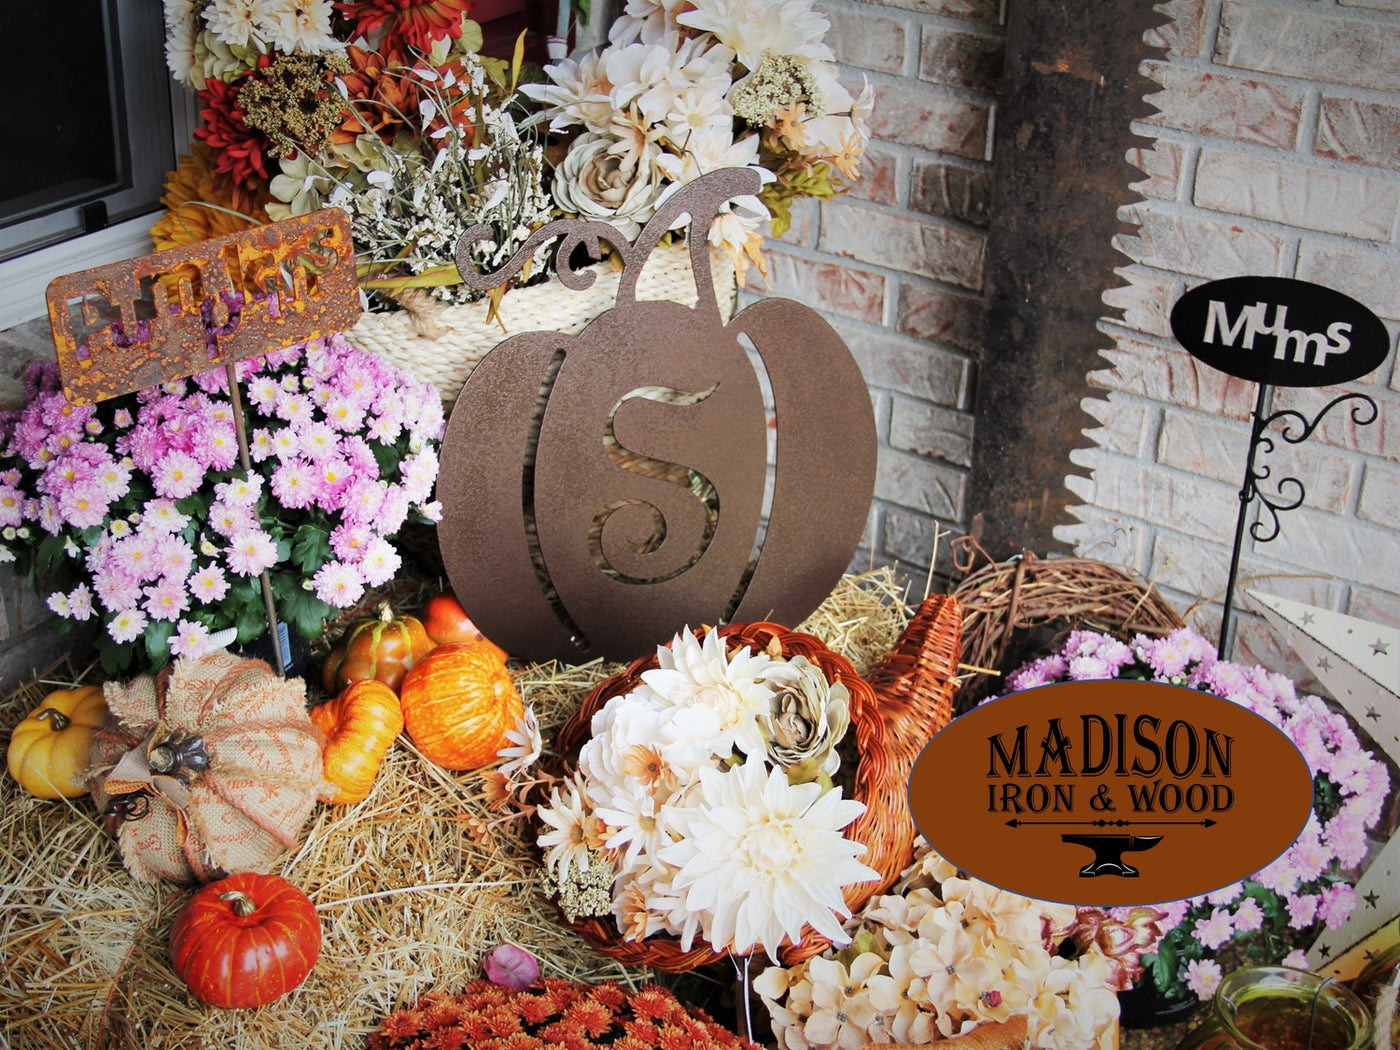 Personalized Monogram Pumpkin Metal Sign - Madison Iron and Wood - Monogram Sign - metal outdoor decor - Steel deocrations - american made products - veteran owned business products - fencing decorations - fencing supplies - custom wall decorations - personalized wall signs - steel - decorative post caps - steel post caps - metal post caps - brackets - structural brackets - home improvement - easter - easter decorations - easter gift - easter yard decor